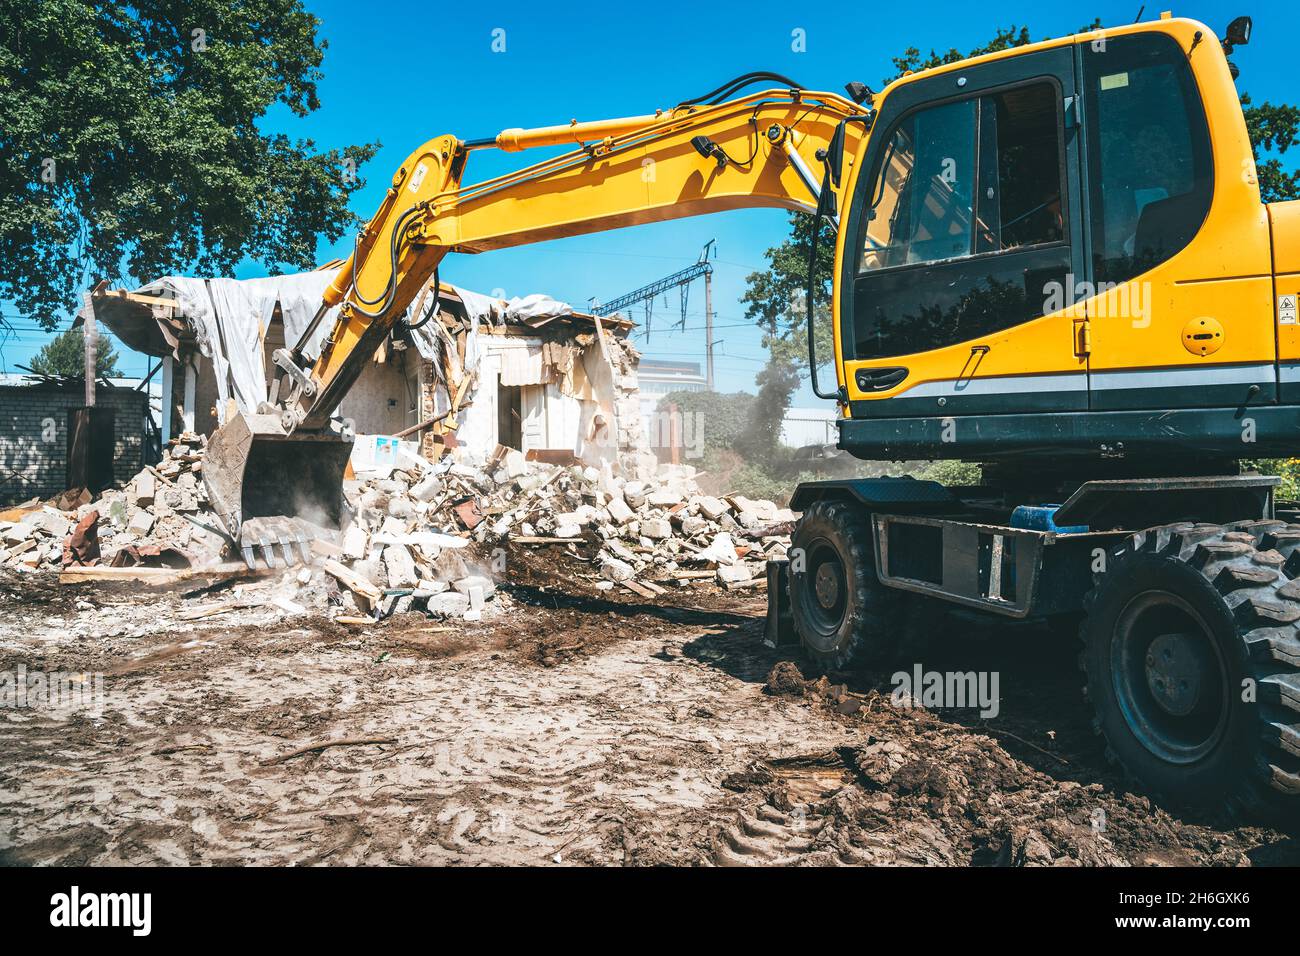 Demolition of building. Process of dismantling of house. Excavator breaks old building. Stock Photo